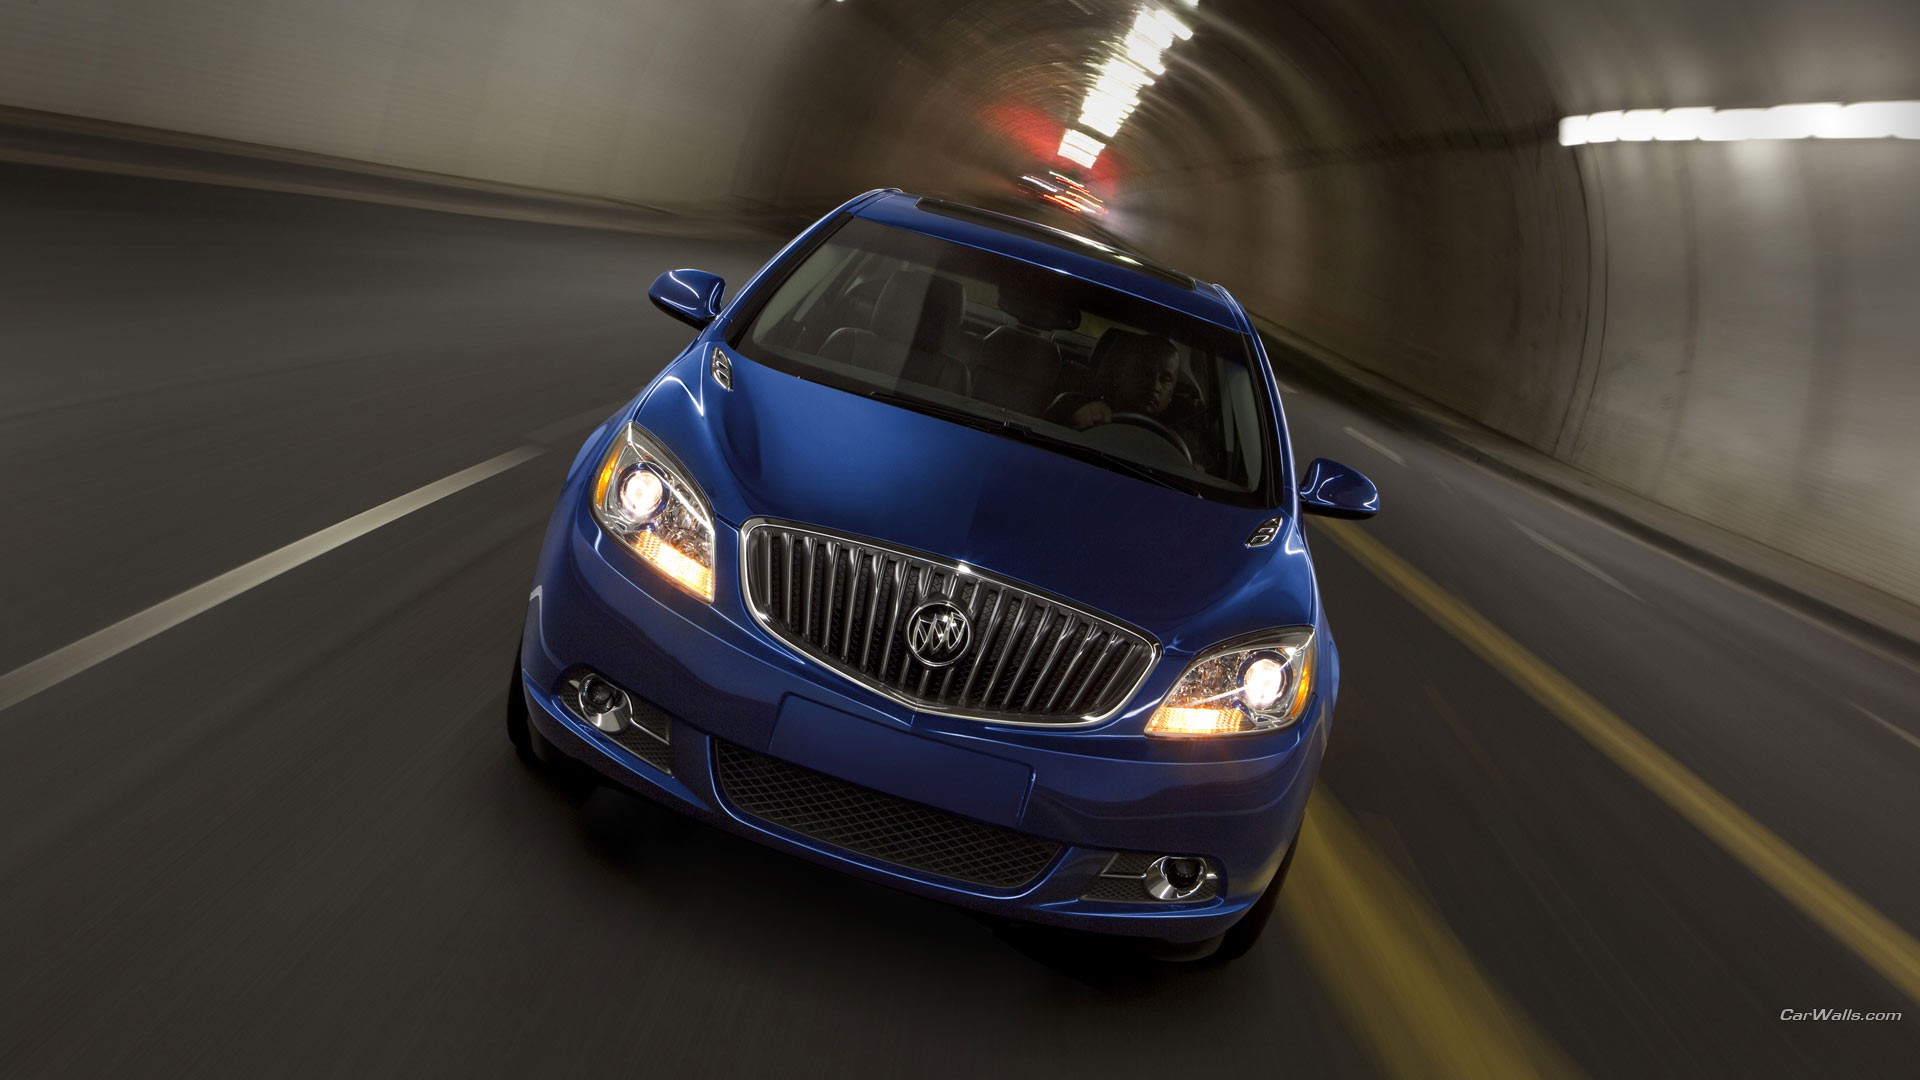 General 1920x1080 Buick Verano Buick tunnel blue cars vehicle road